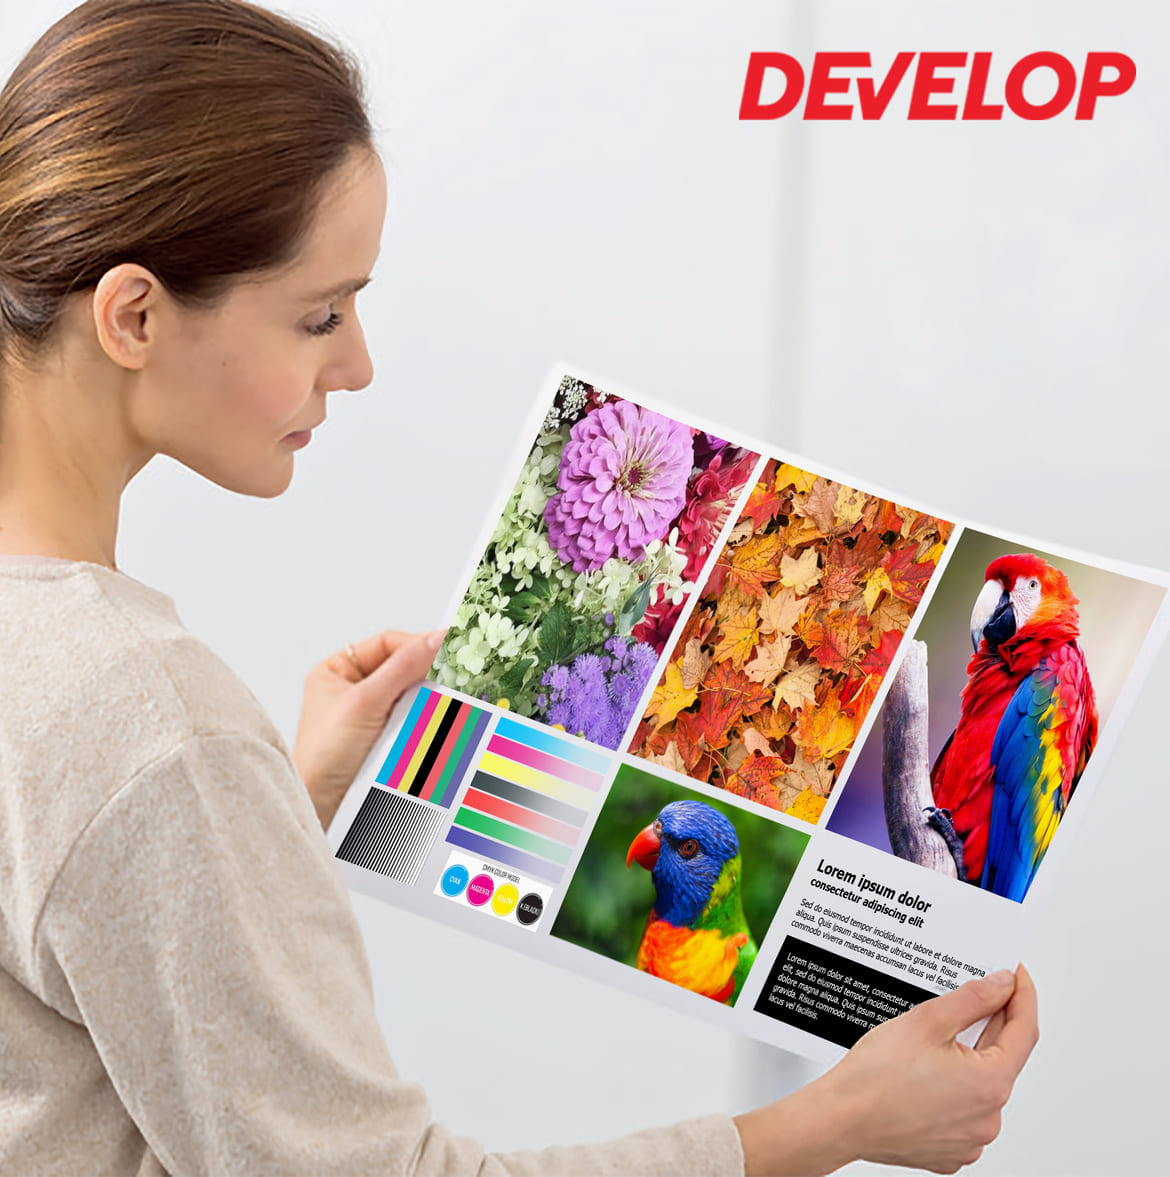 develop-featured-image